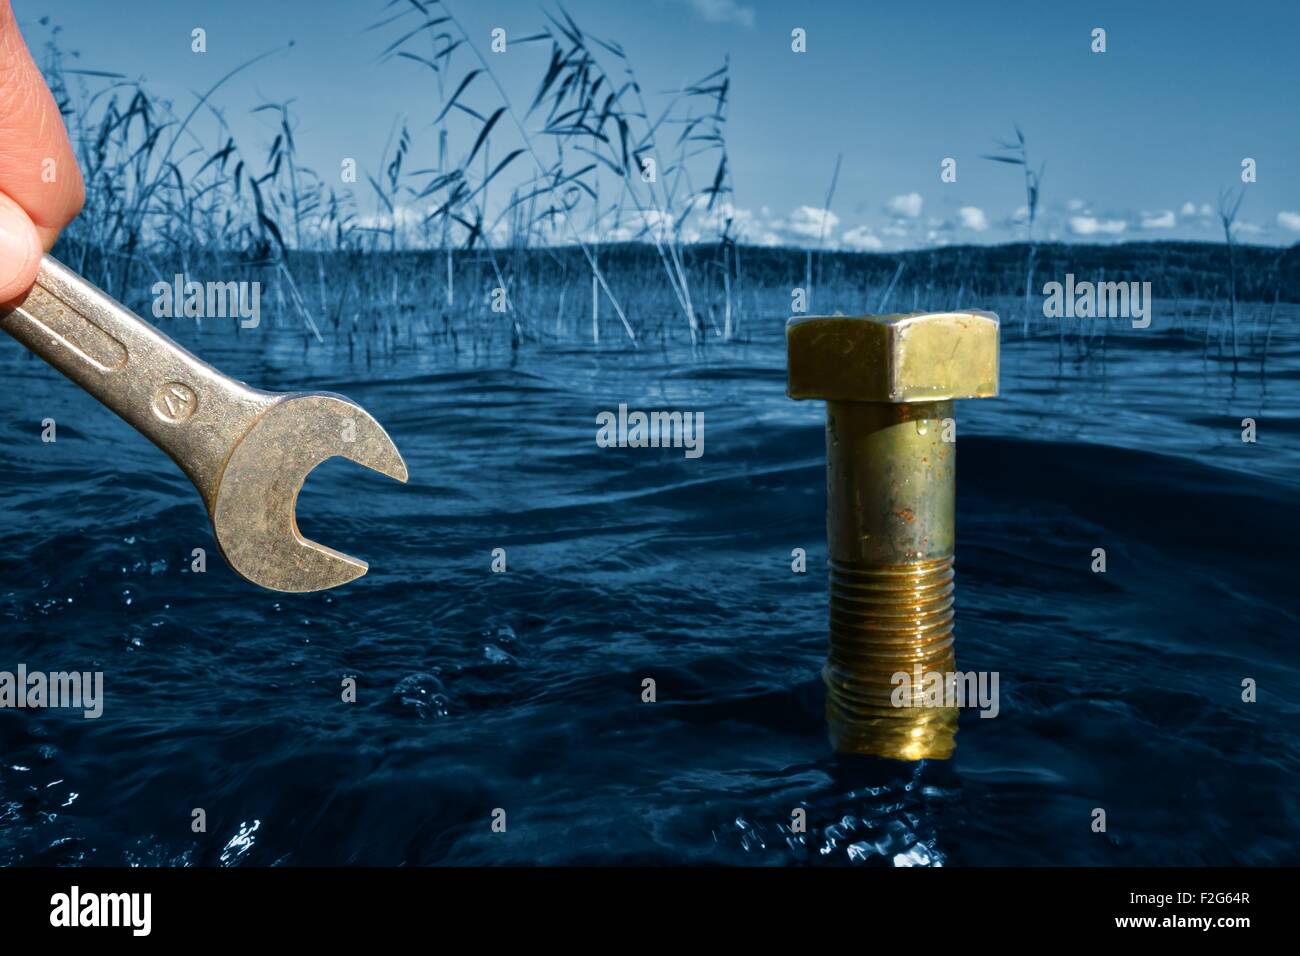 Environmental concept: Hand with a wrench in front of a large bolt in a lake. Stock Photo